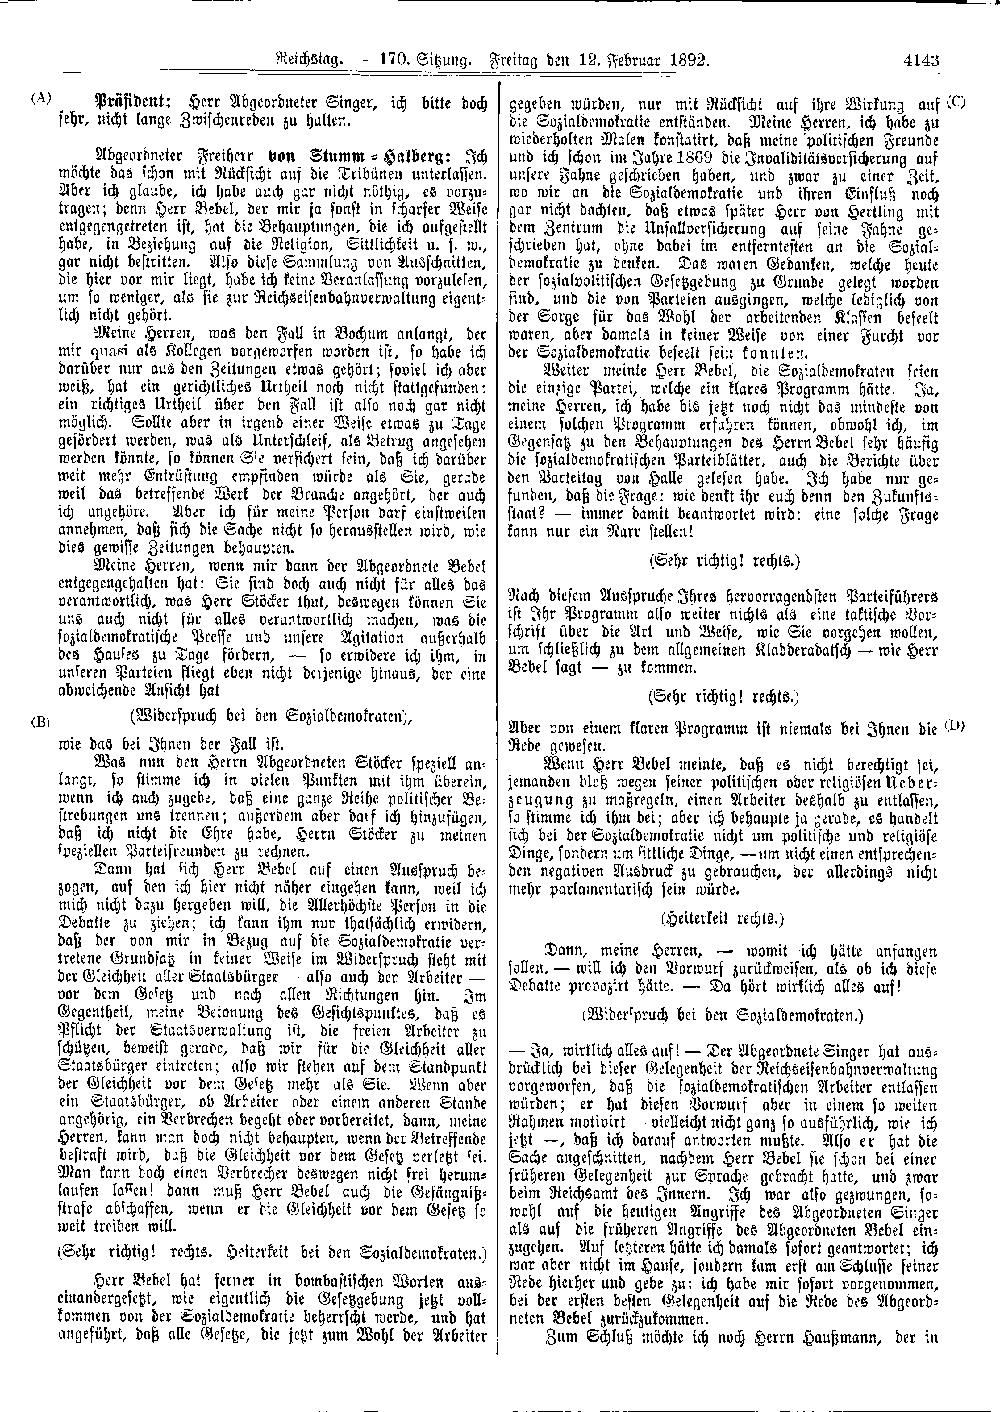 Scan of page 4143